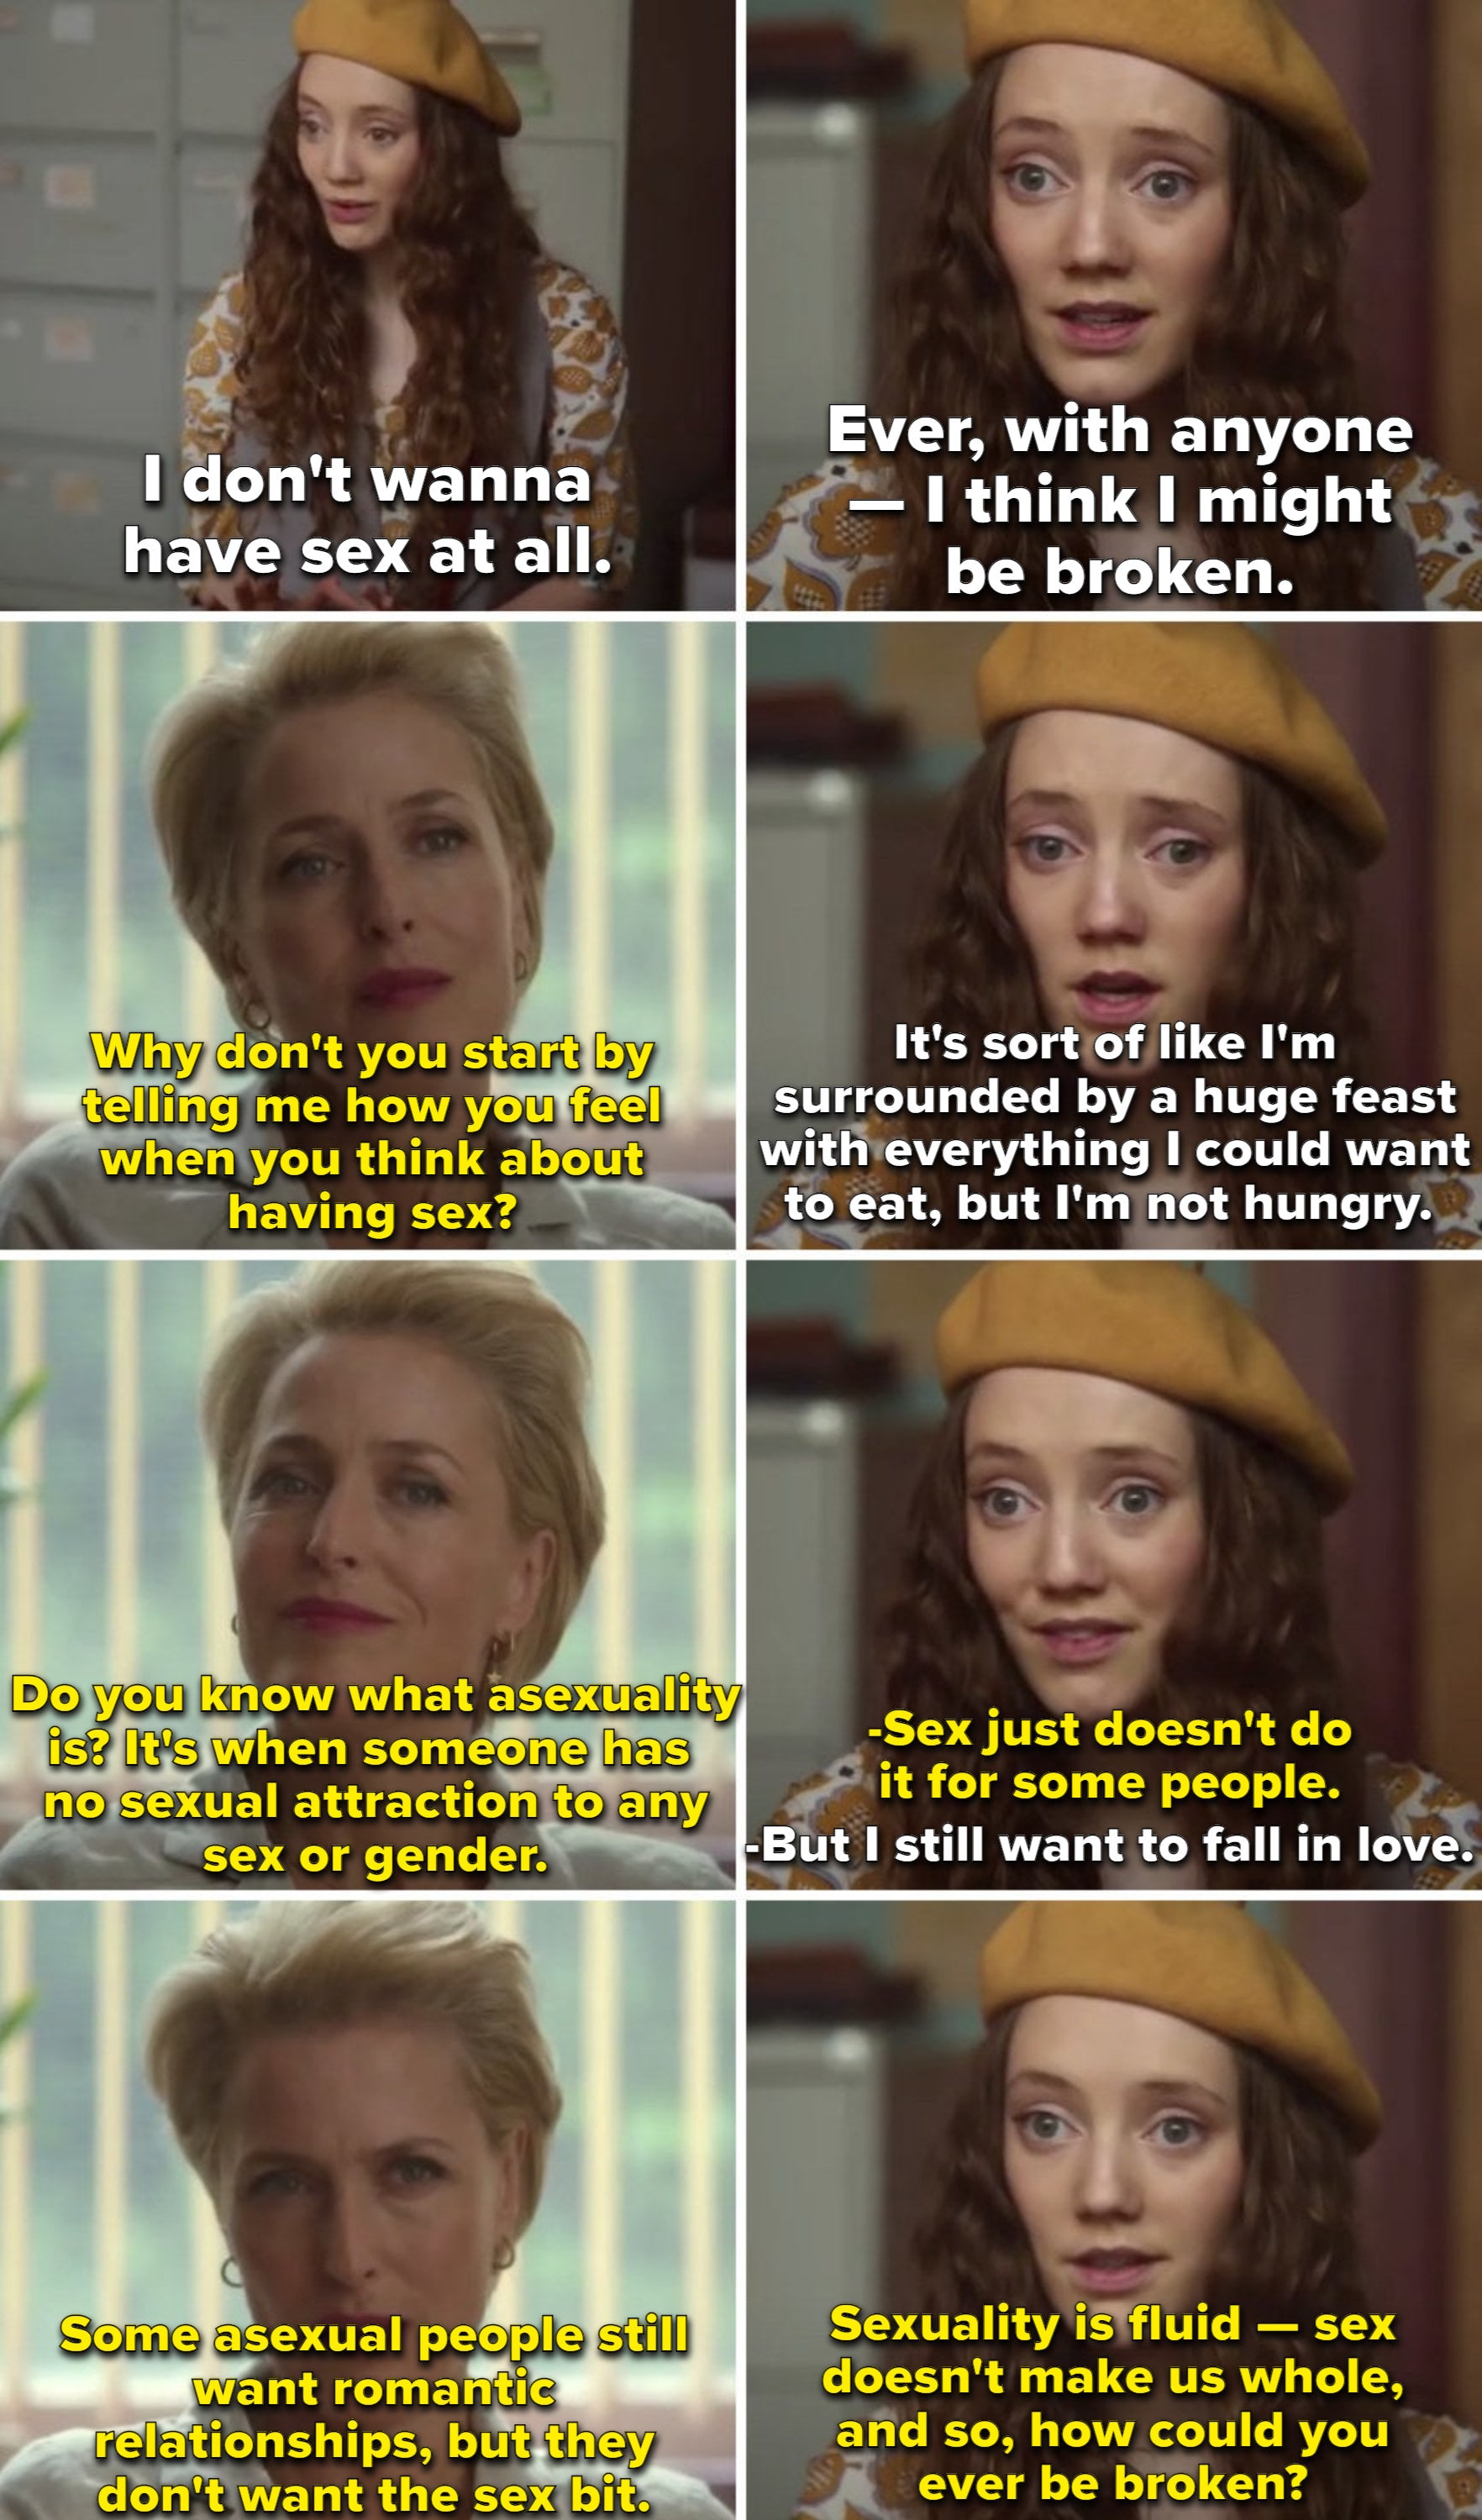 Jean explaining to Florence the definition of asexuality, saying: "Sexuality is fluid — sex doesn't make us whole, and so, how could you ever be broken?"